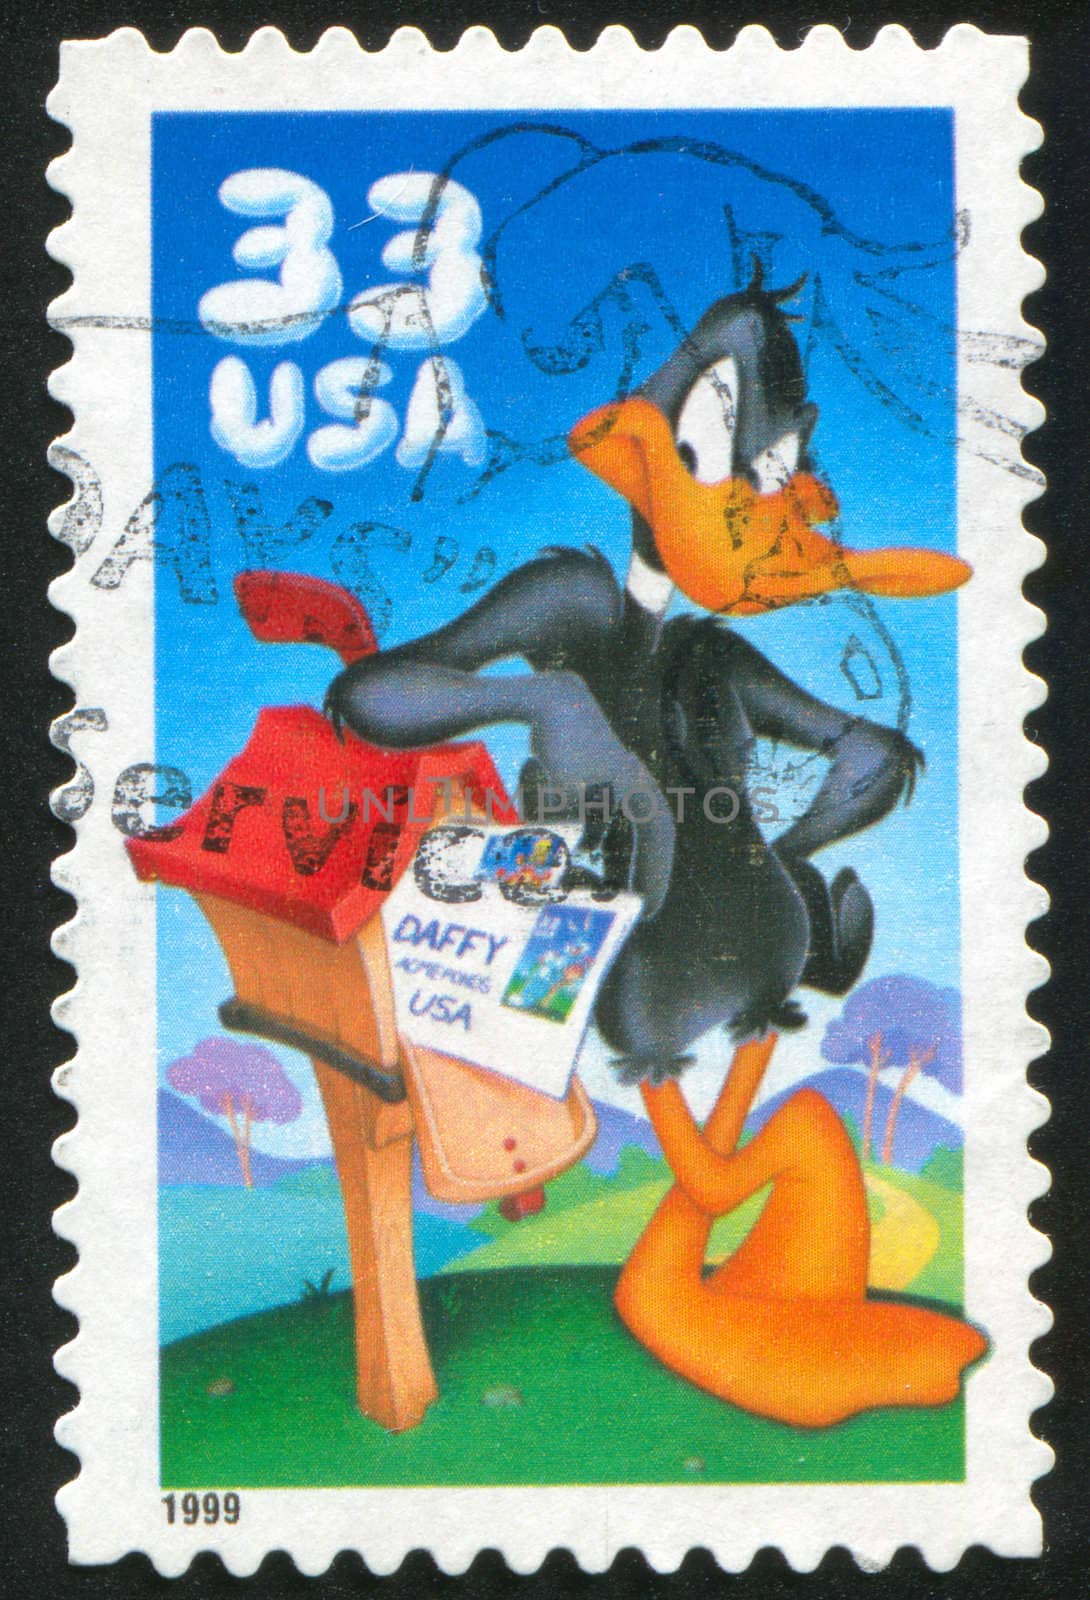 Daffy Duck by rook